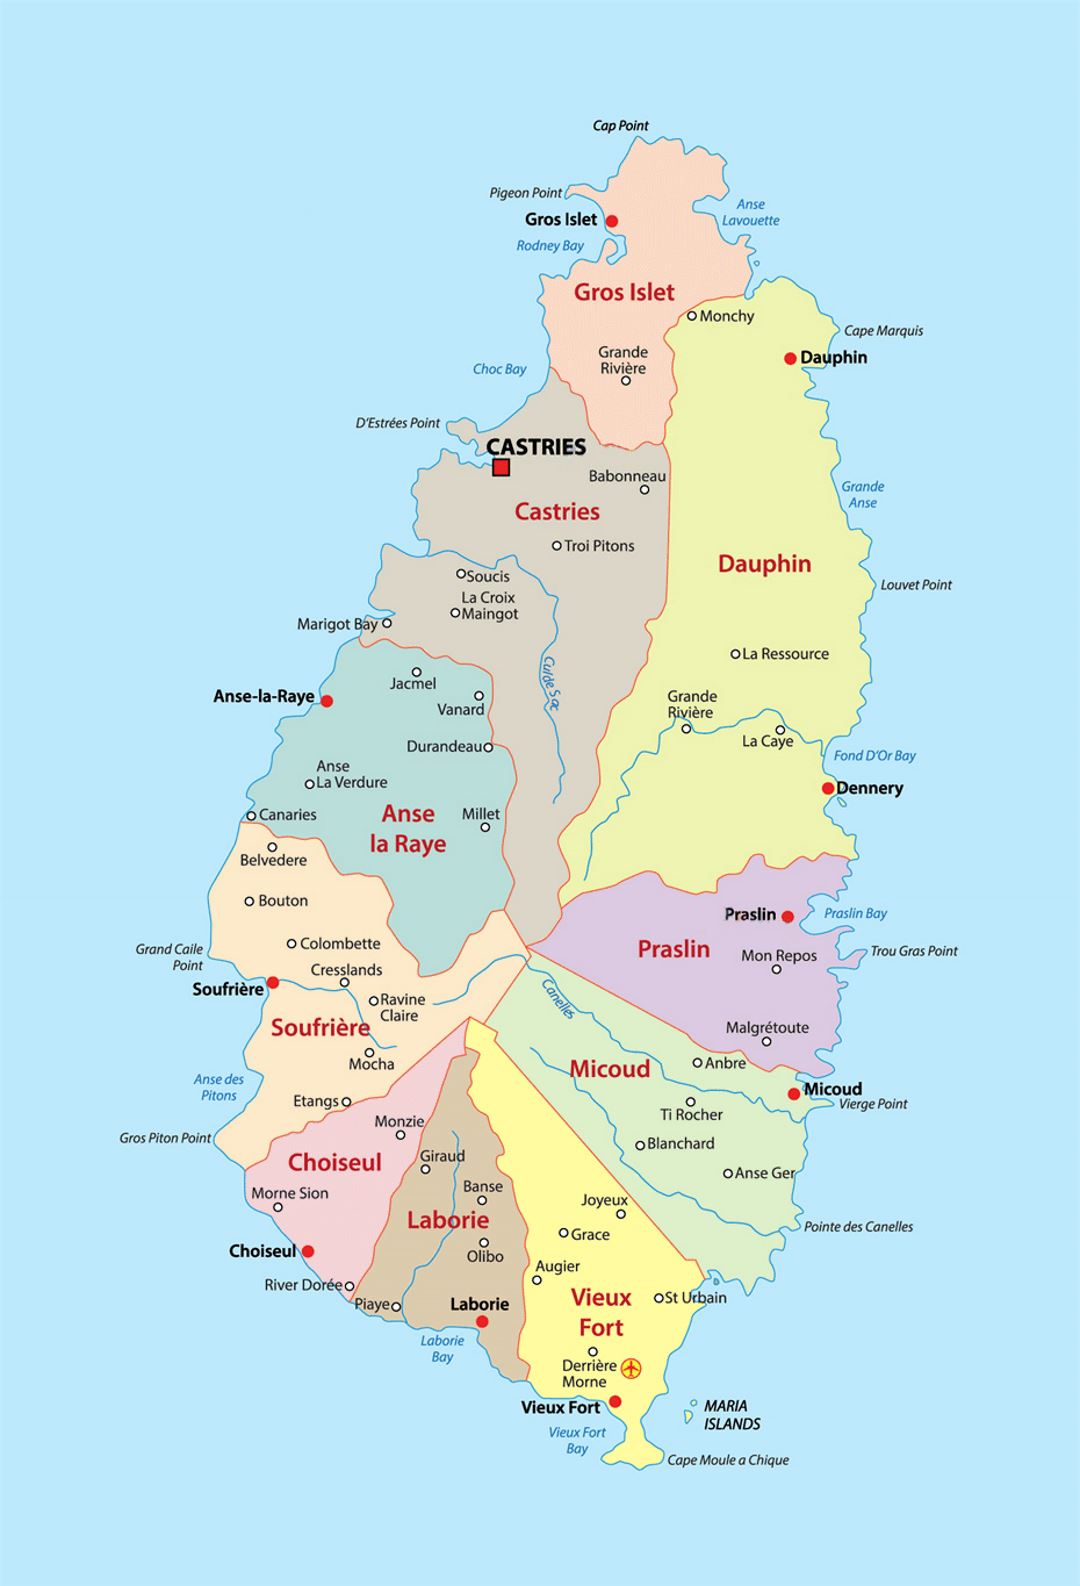 Detailed administrative divisions map of Saint Lucia with cities